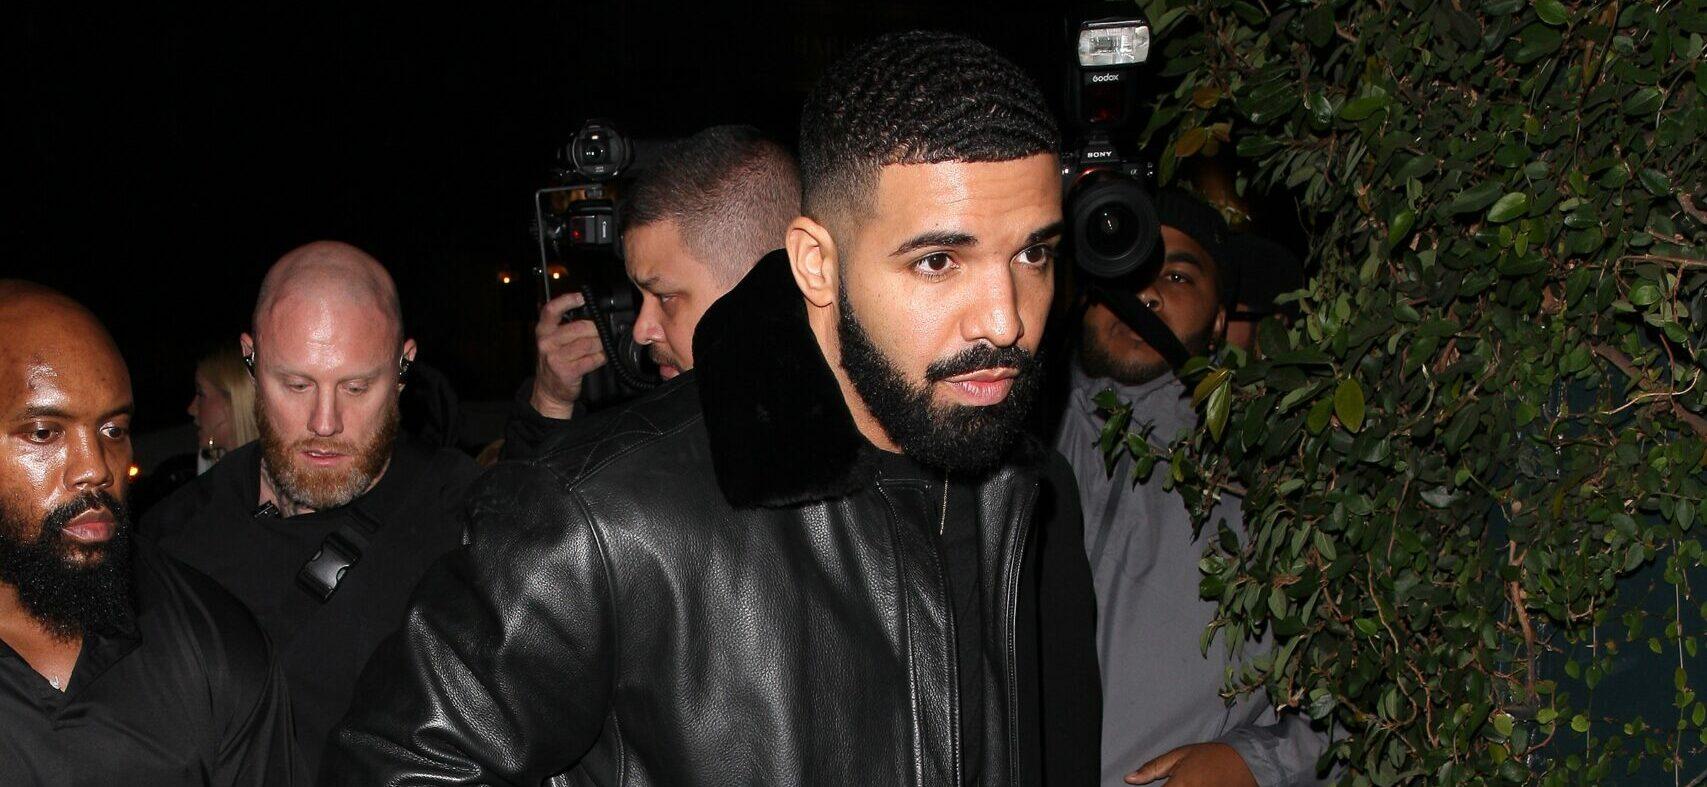 Rapper Drake is seen going to the Poppy club to party after performing on stage at The Forum